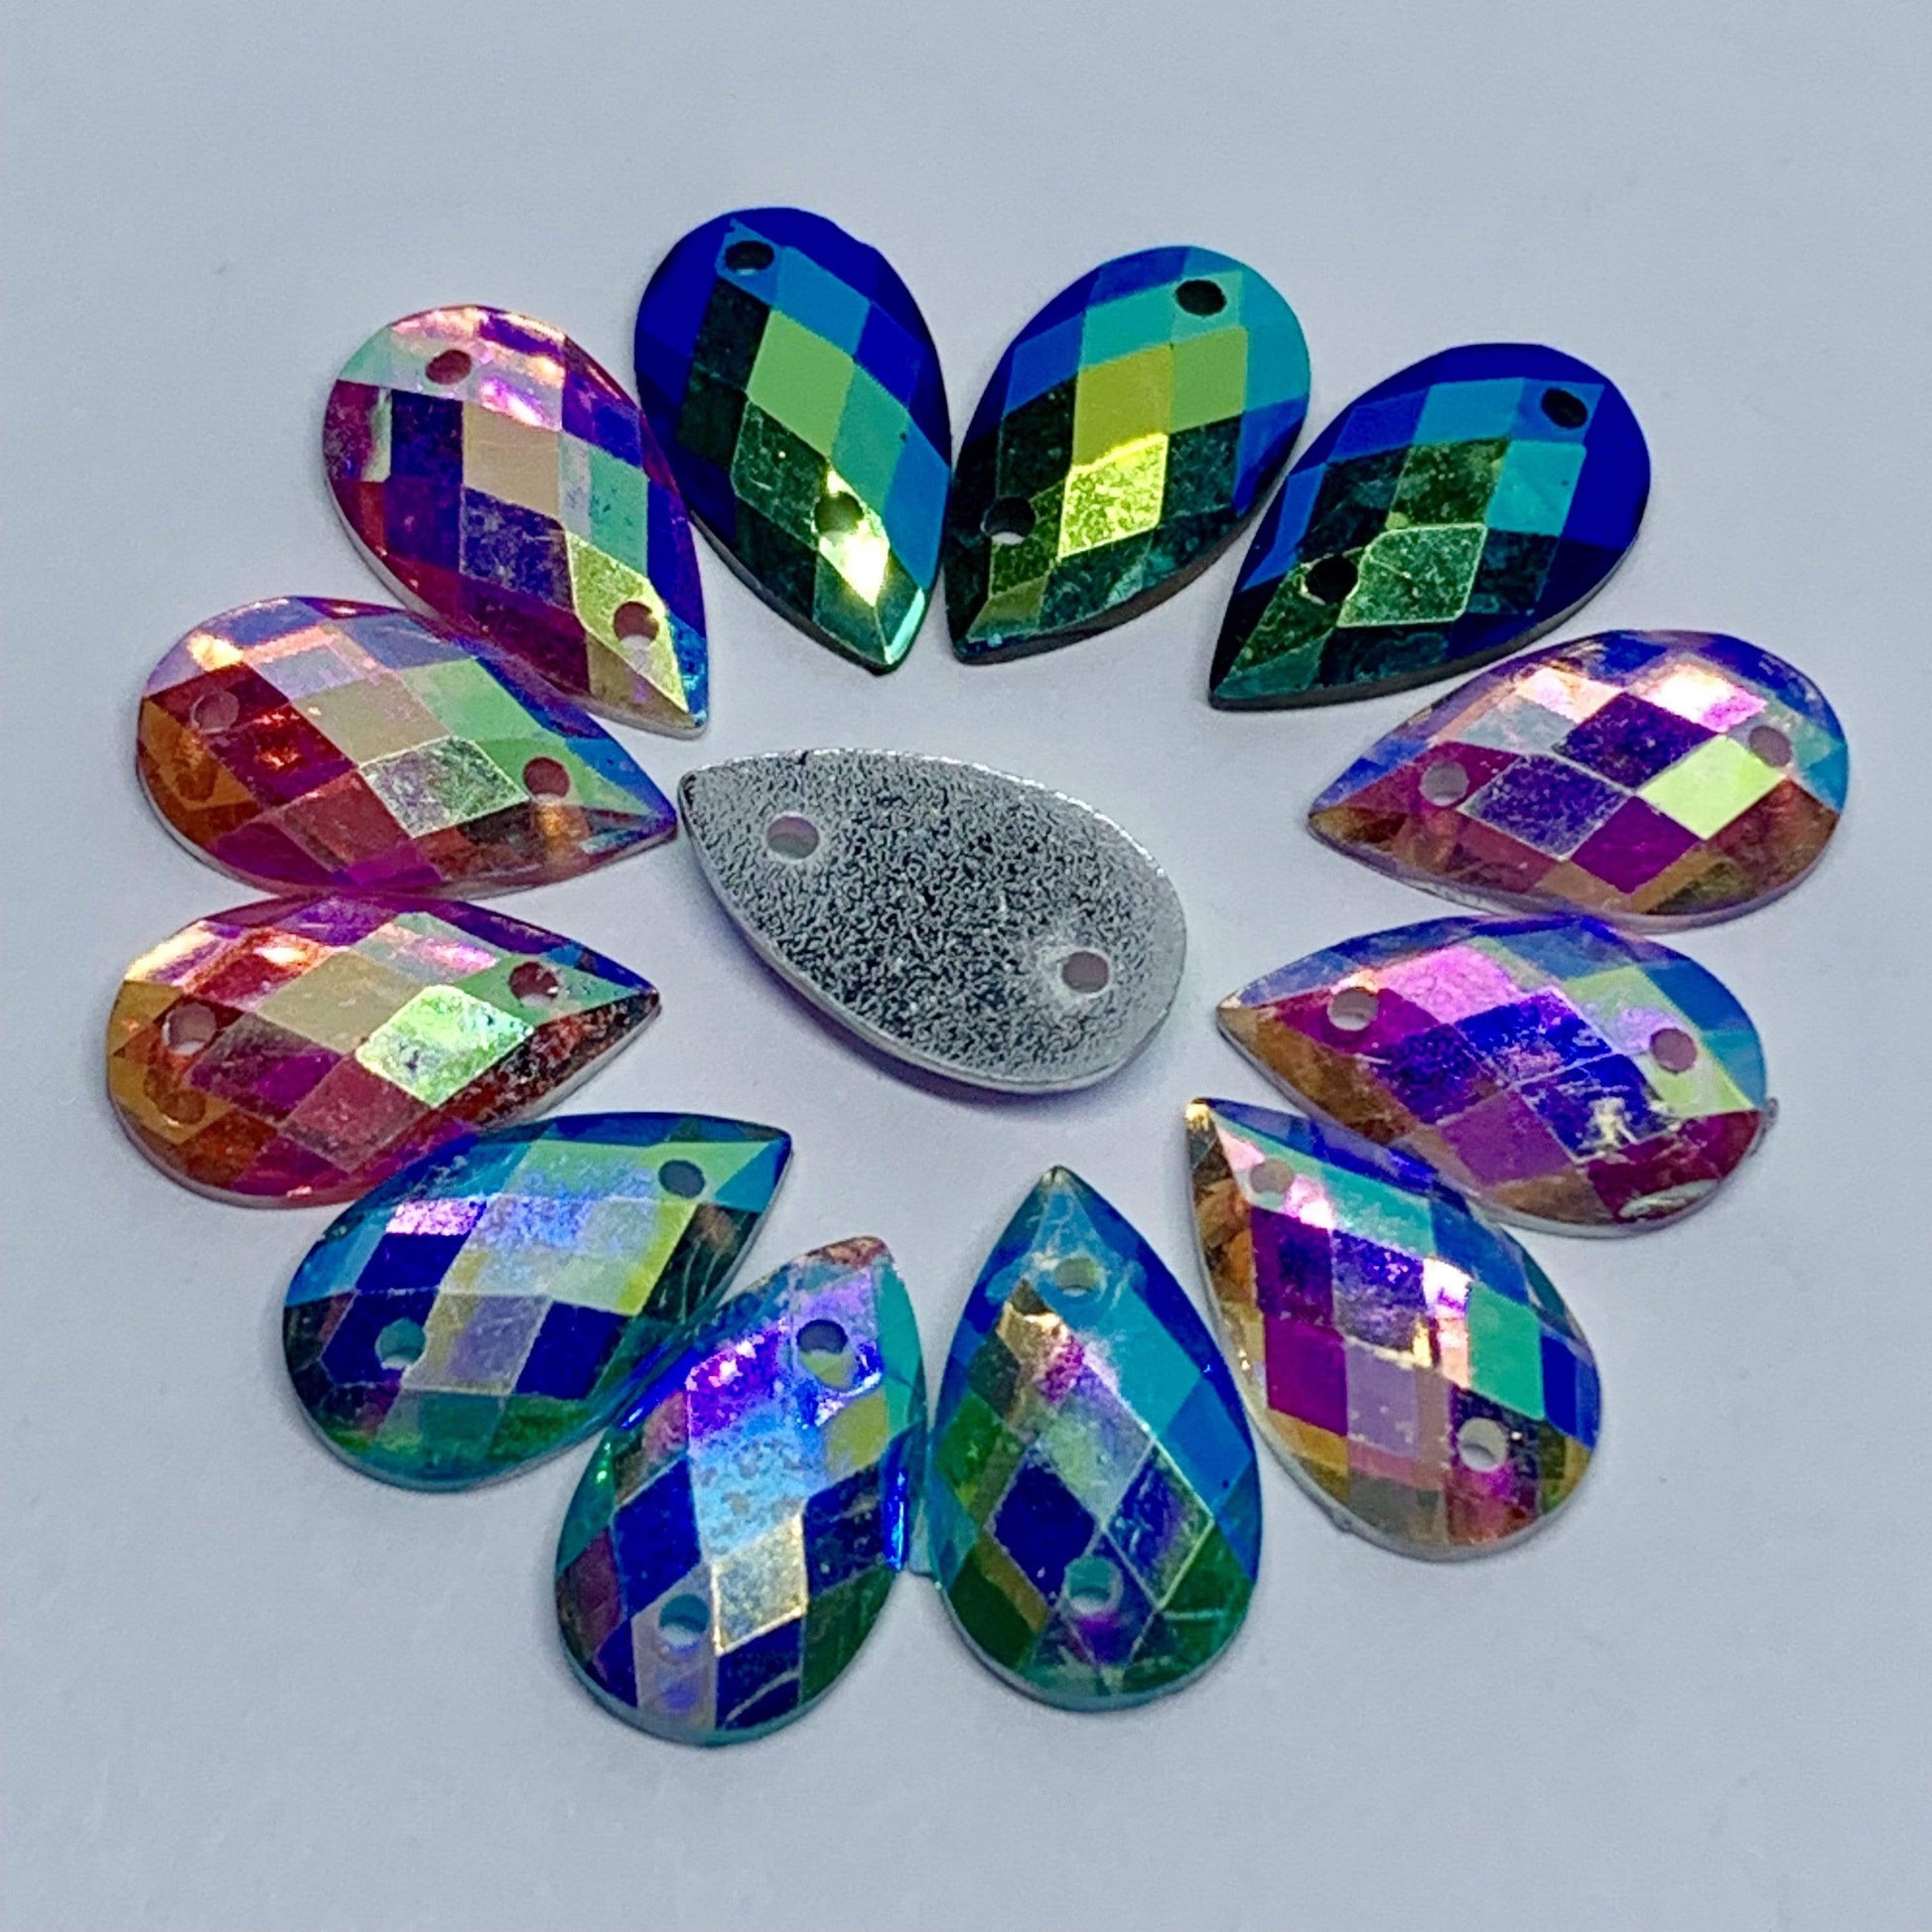 Sundaylace Creations & Bling Resin Gems 7*12mm Muli-colour Checkered pattern, Teardrops, Sew on, Resin Gem